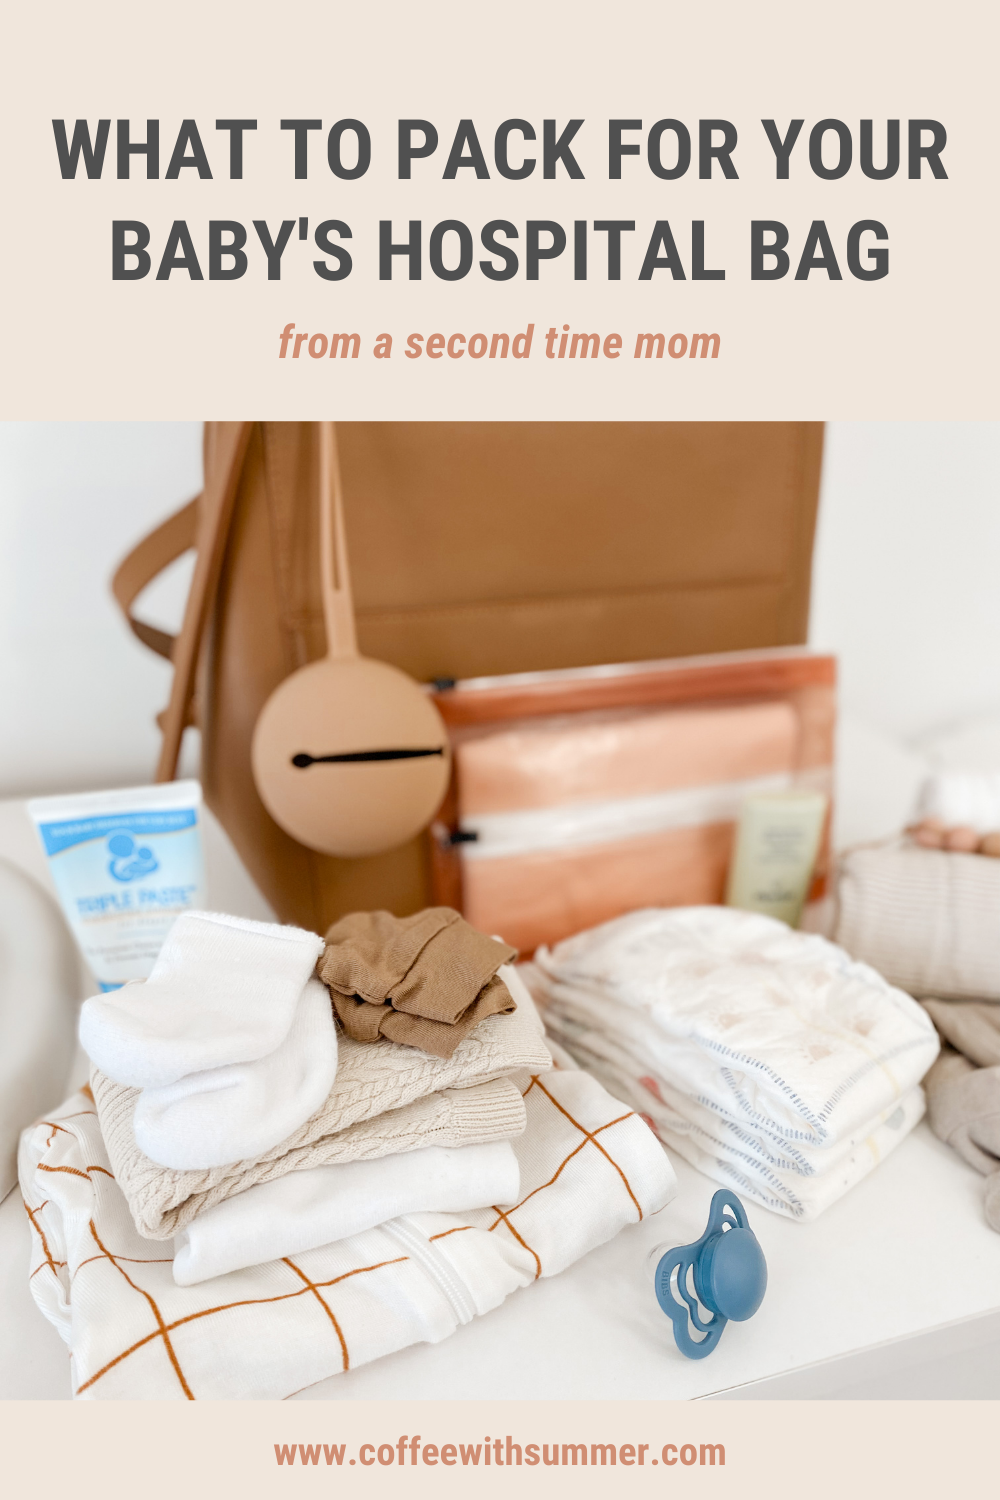 Top Essentials For Your Baby For Your Hospital Bag - Coffee With